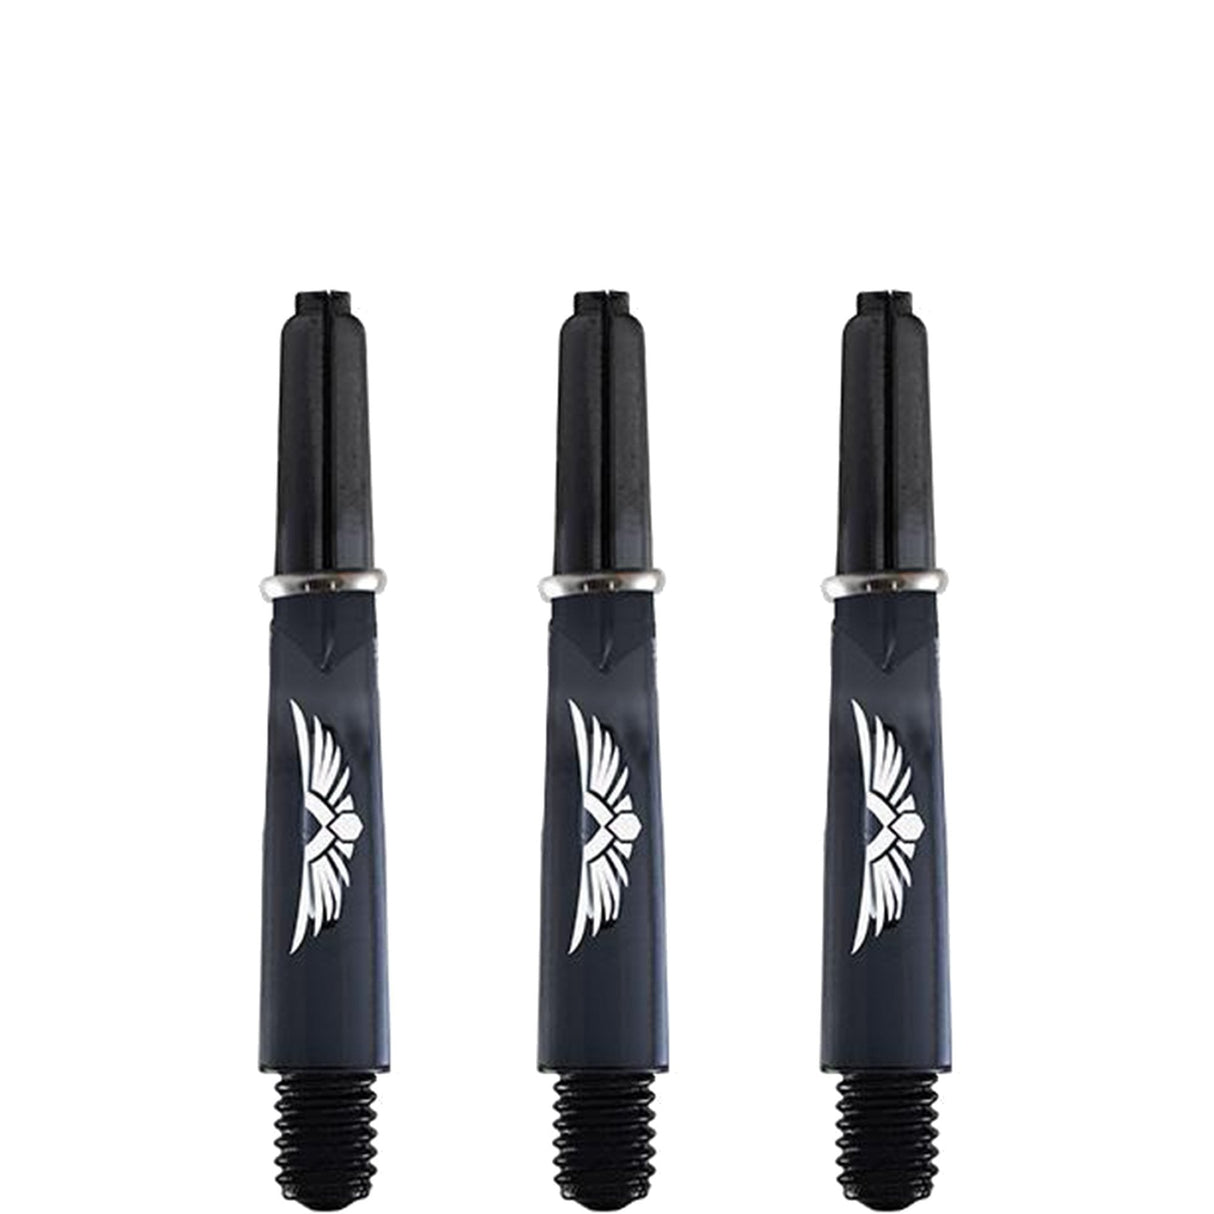 Shot Eagle Claw Dart Shafts - with Machined Rings - Strong Polycarbonate Stems - Clear Black Short